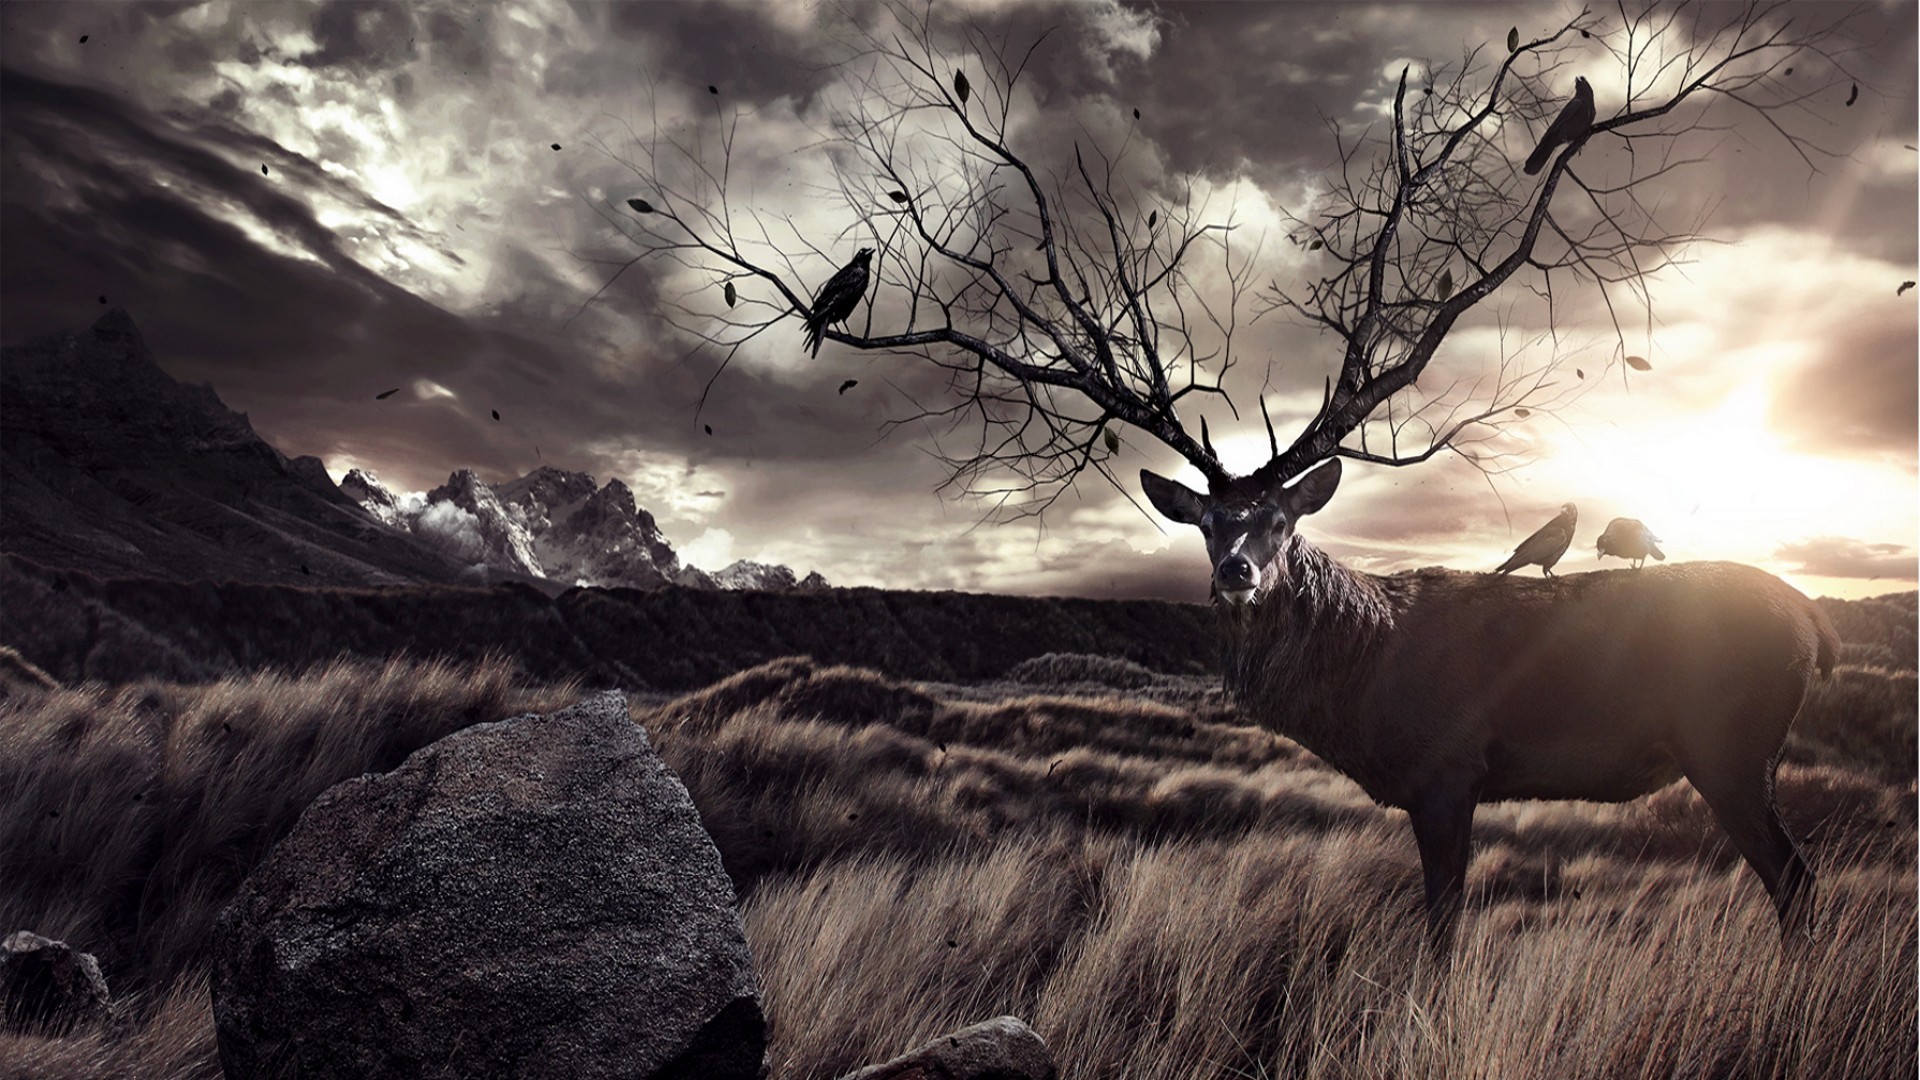 1920x1080 By Debrah Croston V.864: Amazing Wild Deer Pictures & Backgrounds - HD  Wallpapers